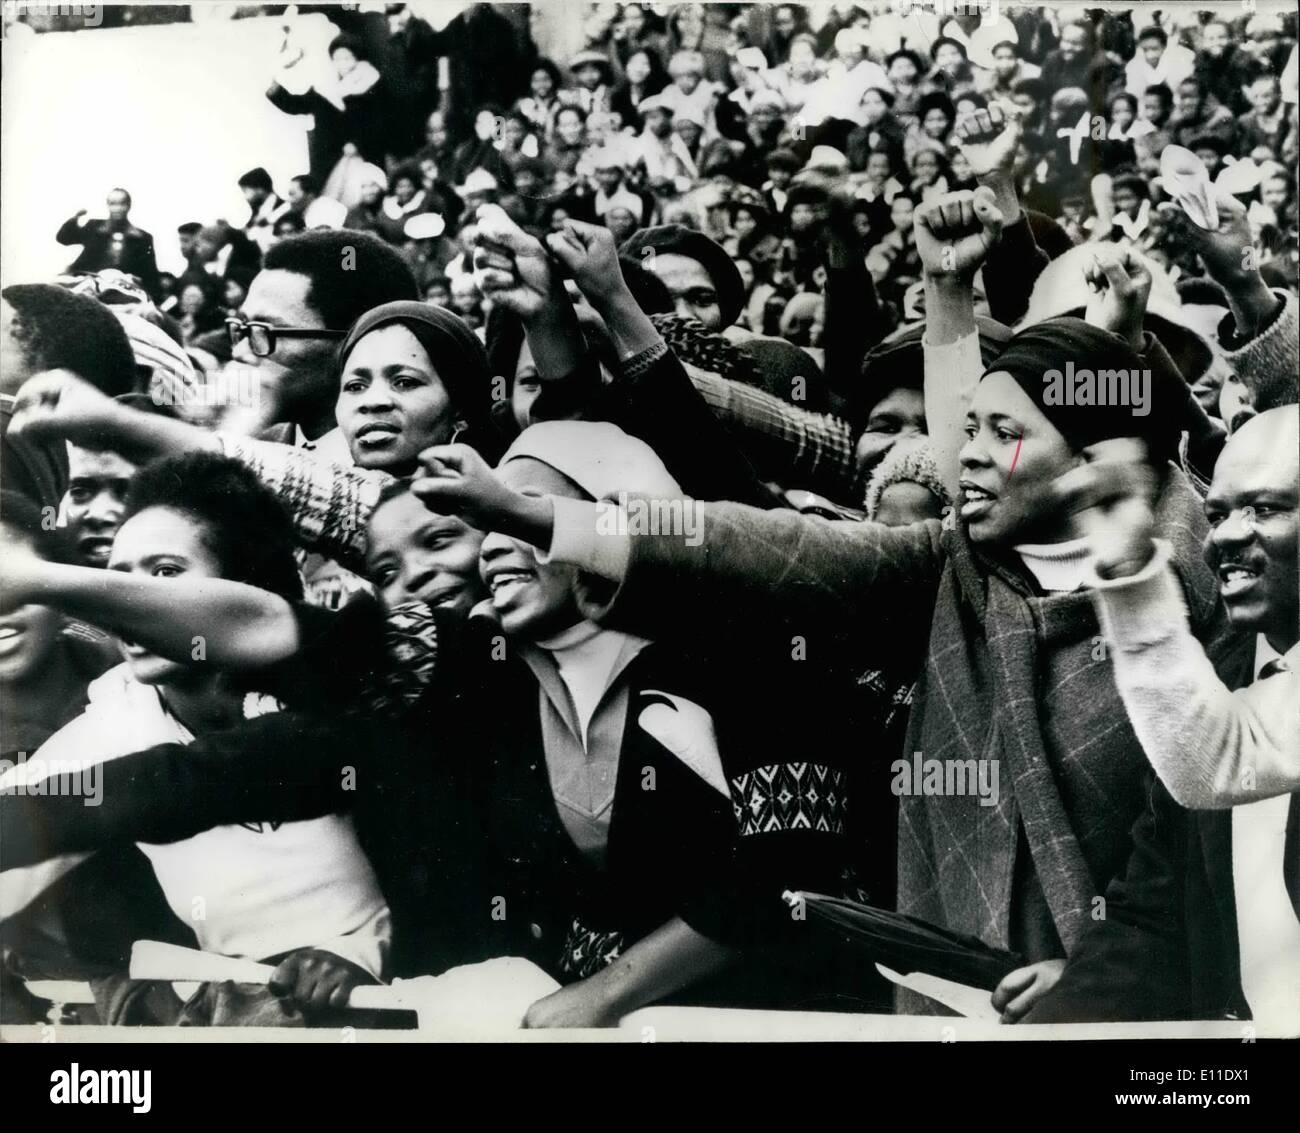 Sep. 09, 1977 - 20,000 Attended Funeral Of Black Leader Steve Biko: An estimated 20,000 people attended the Sports Stadium funeral of 30 year old Steve Biko, the black leader who died a fortnight ago in a police call in Pretoria. It took place in King William's Town., South Africa. Speakers at the five hour service belief that Biko died violently. Photo shows Changing Black women giving the black power salute during the service for Black Leader Steve Biko in the Sport Statium at King William's Town, South Africa, last sunday. Stock Photo